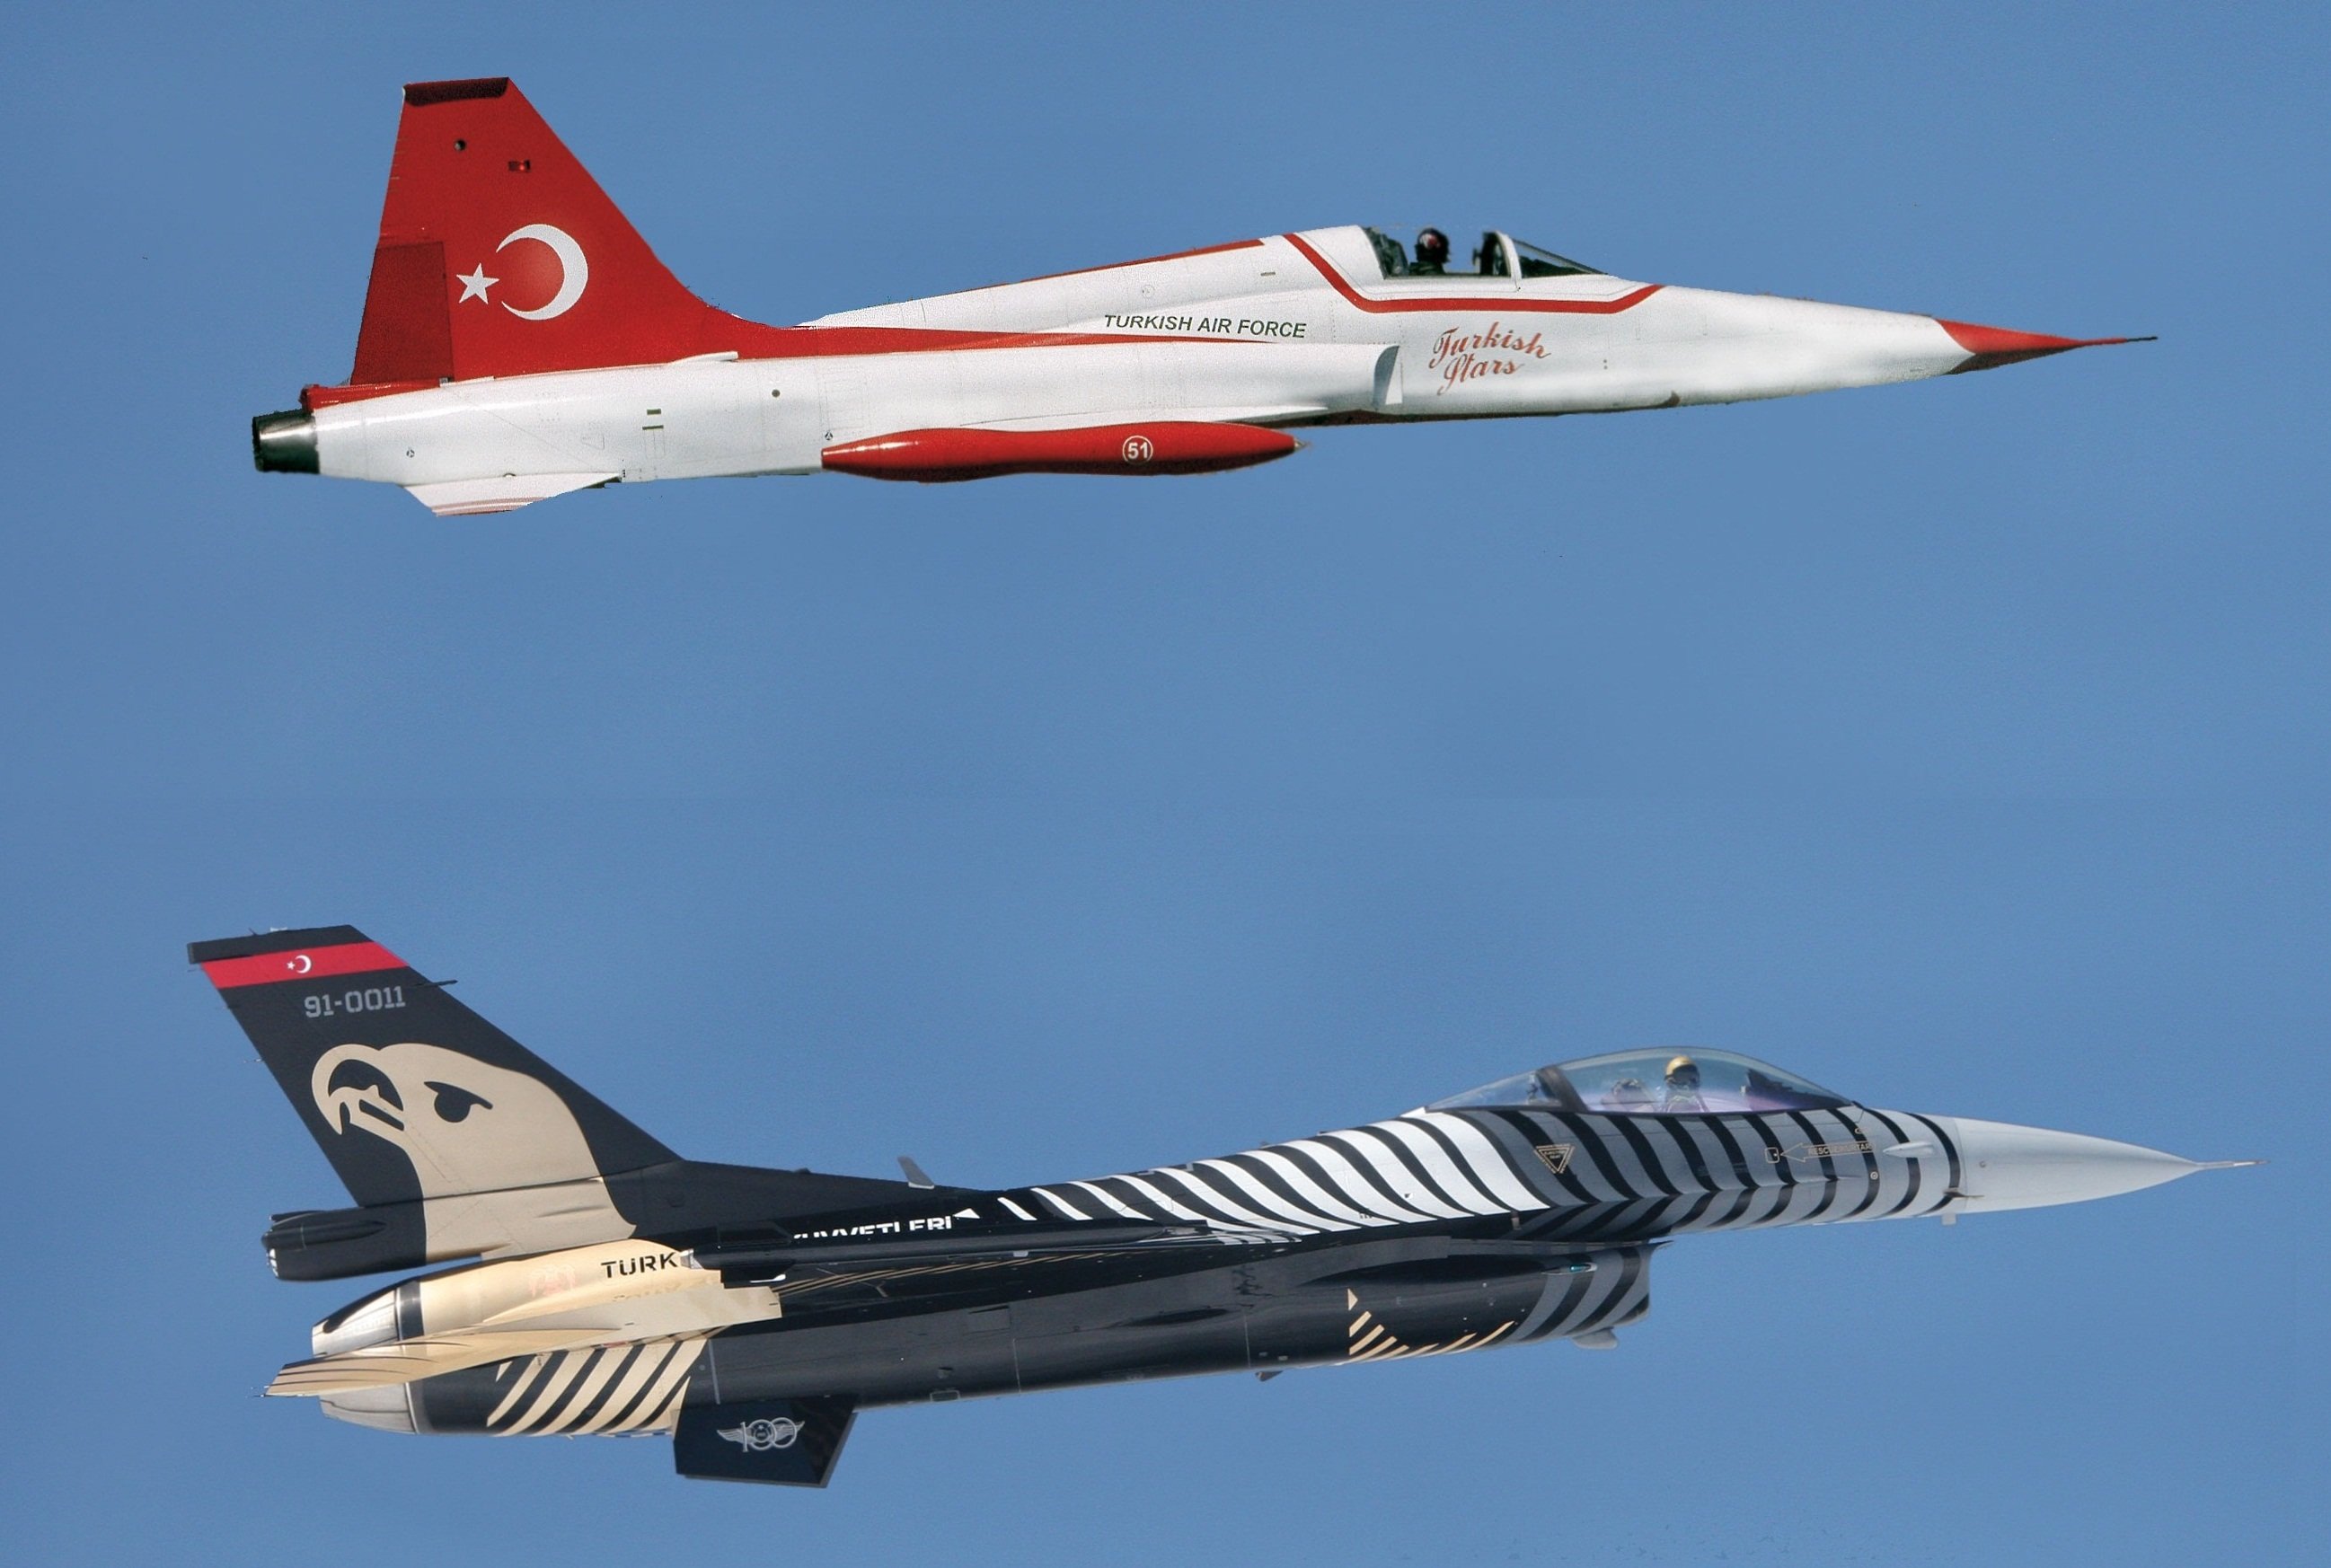 acrobatic, Air, Aircrafts, Turkish, Stars, Team, Northrop, F Freedom, Fighter Wallpaper HD / Desktop and Mobile Background